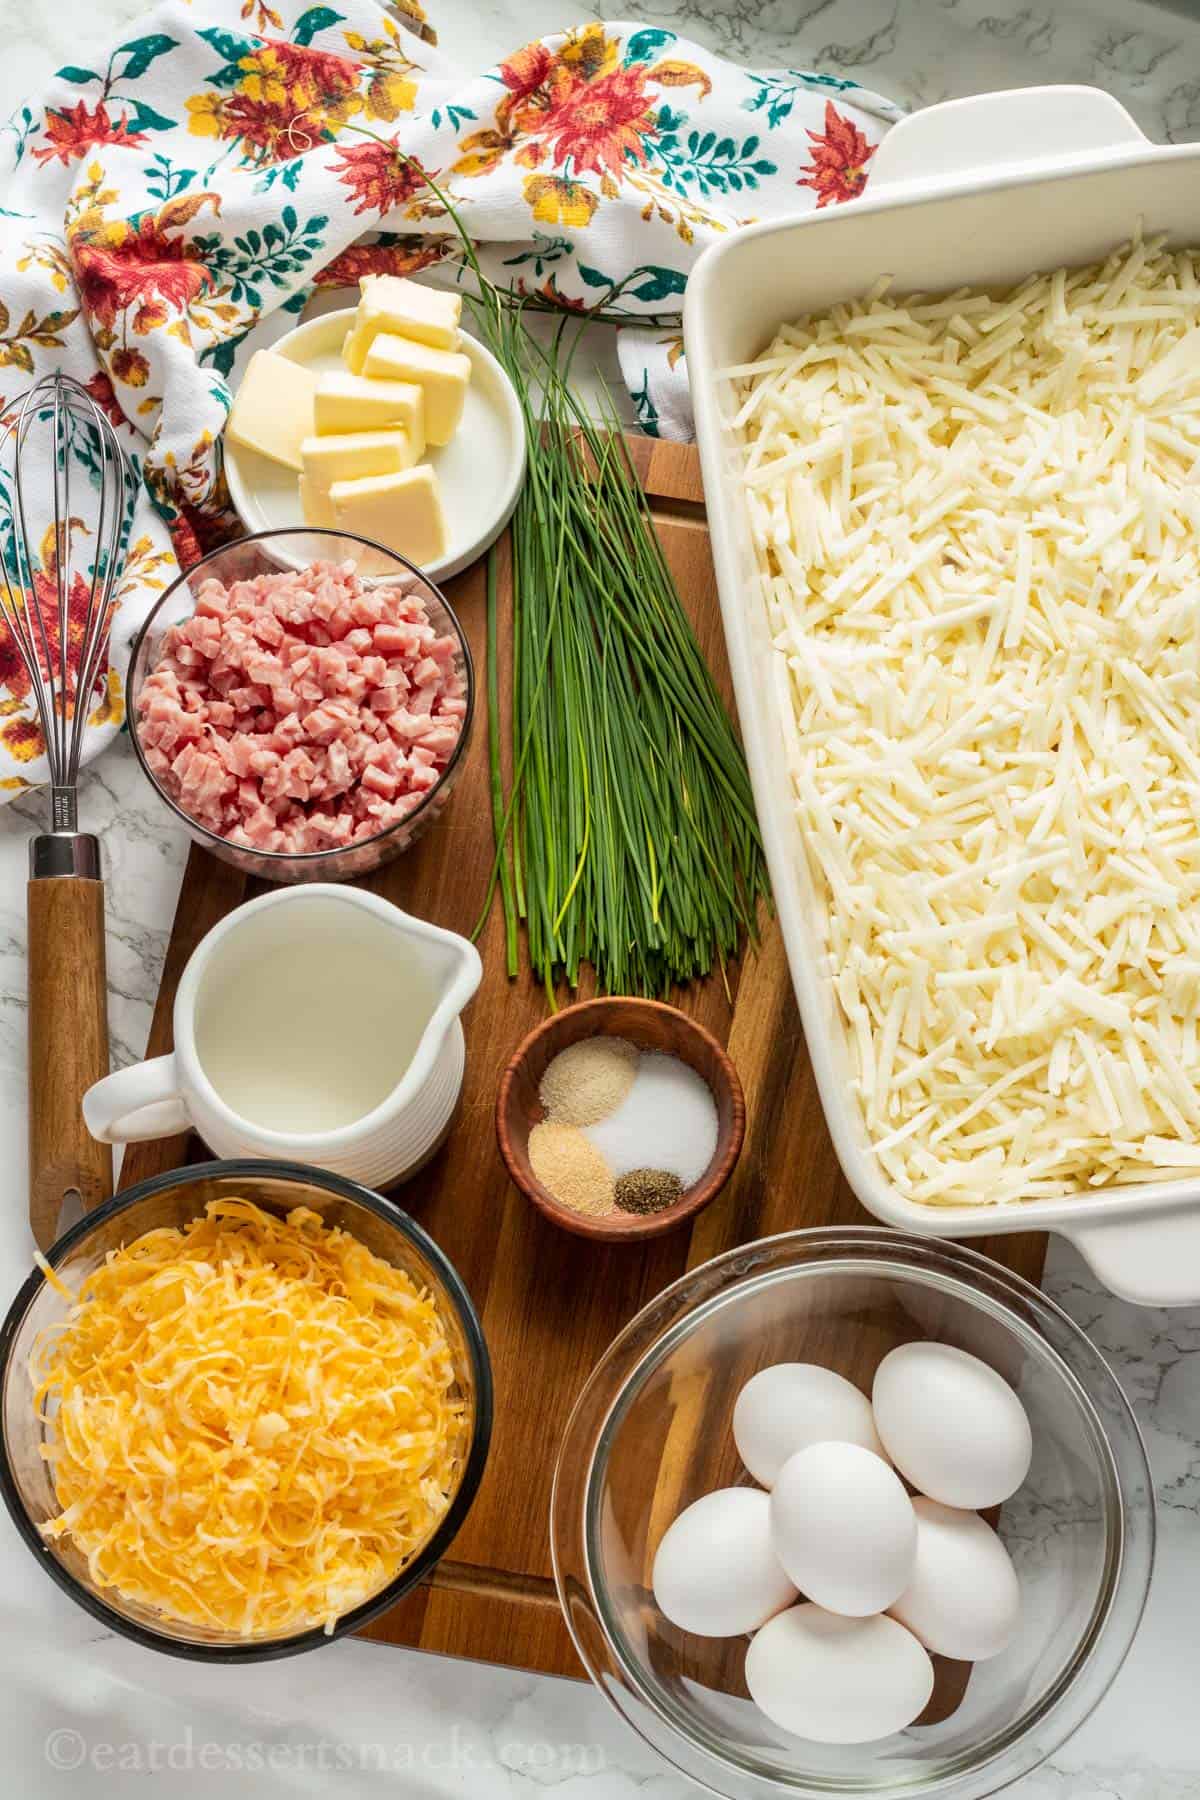 Ingredients for ham and cheese hash brown casserole on wood cutting board.